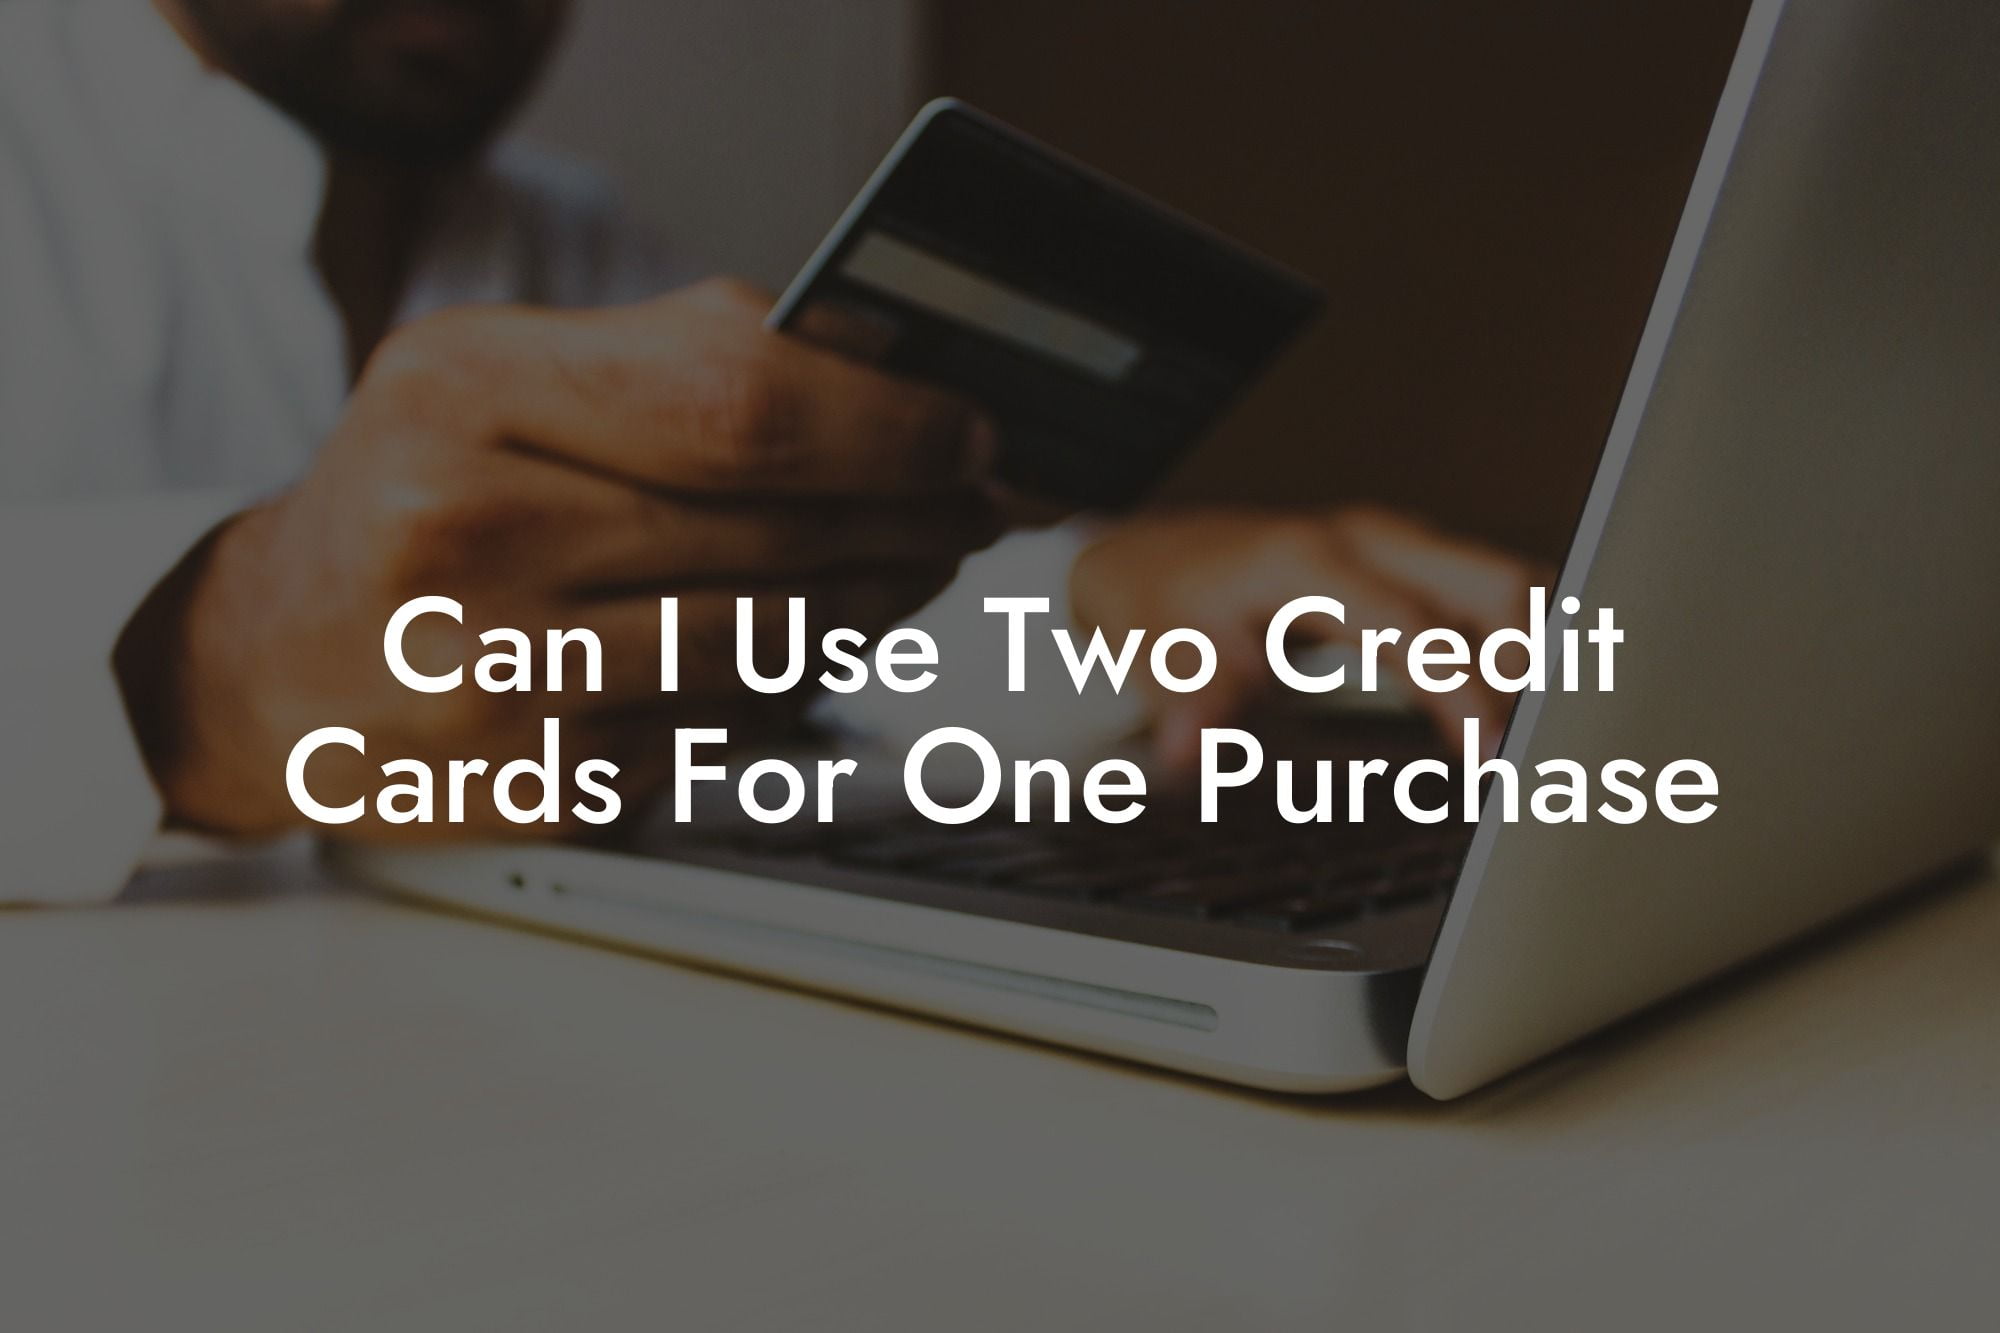 Can I Use Two Credit Cards For One Purchase